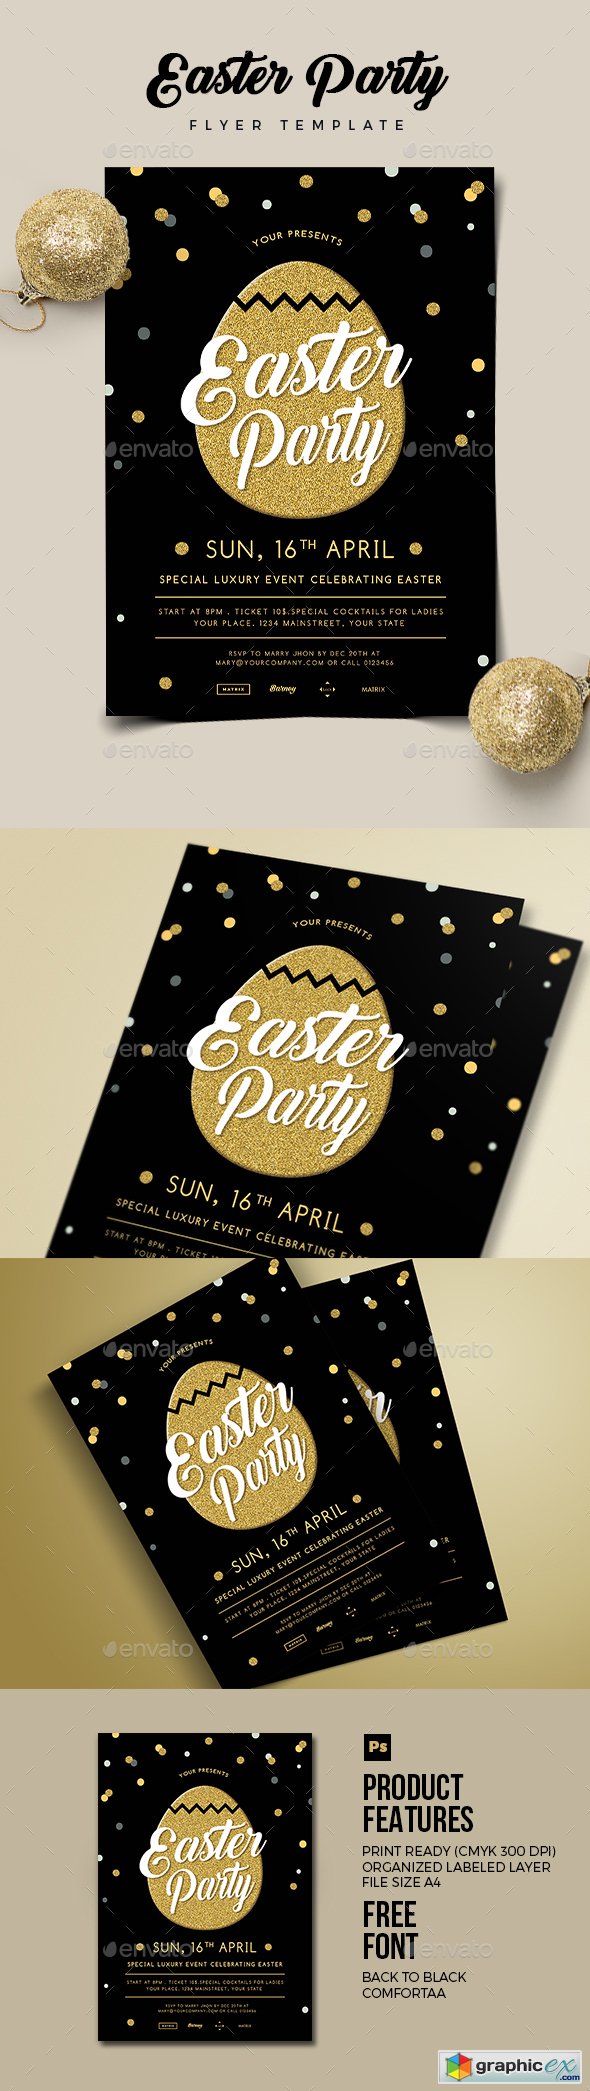 Easter Party Flyer 02